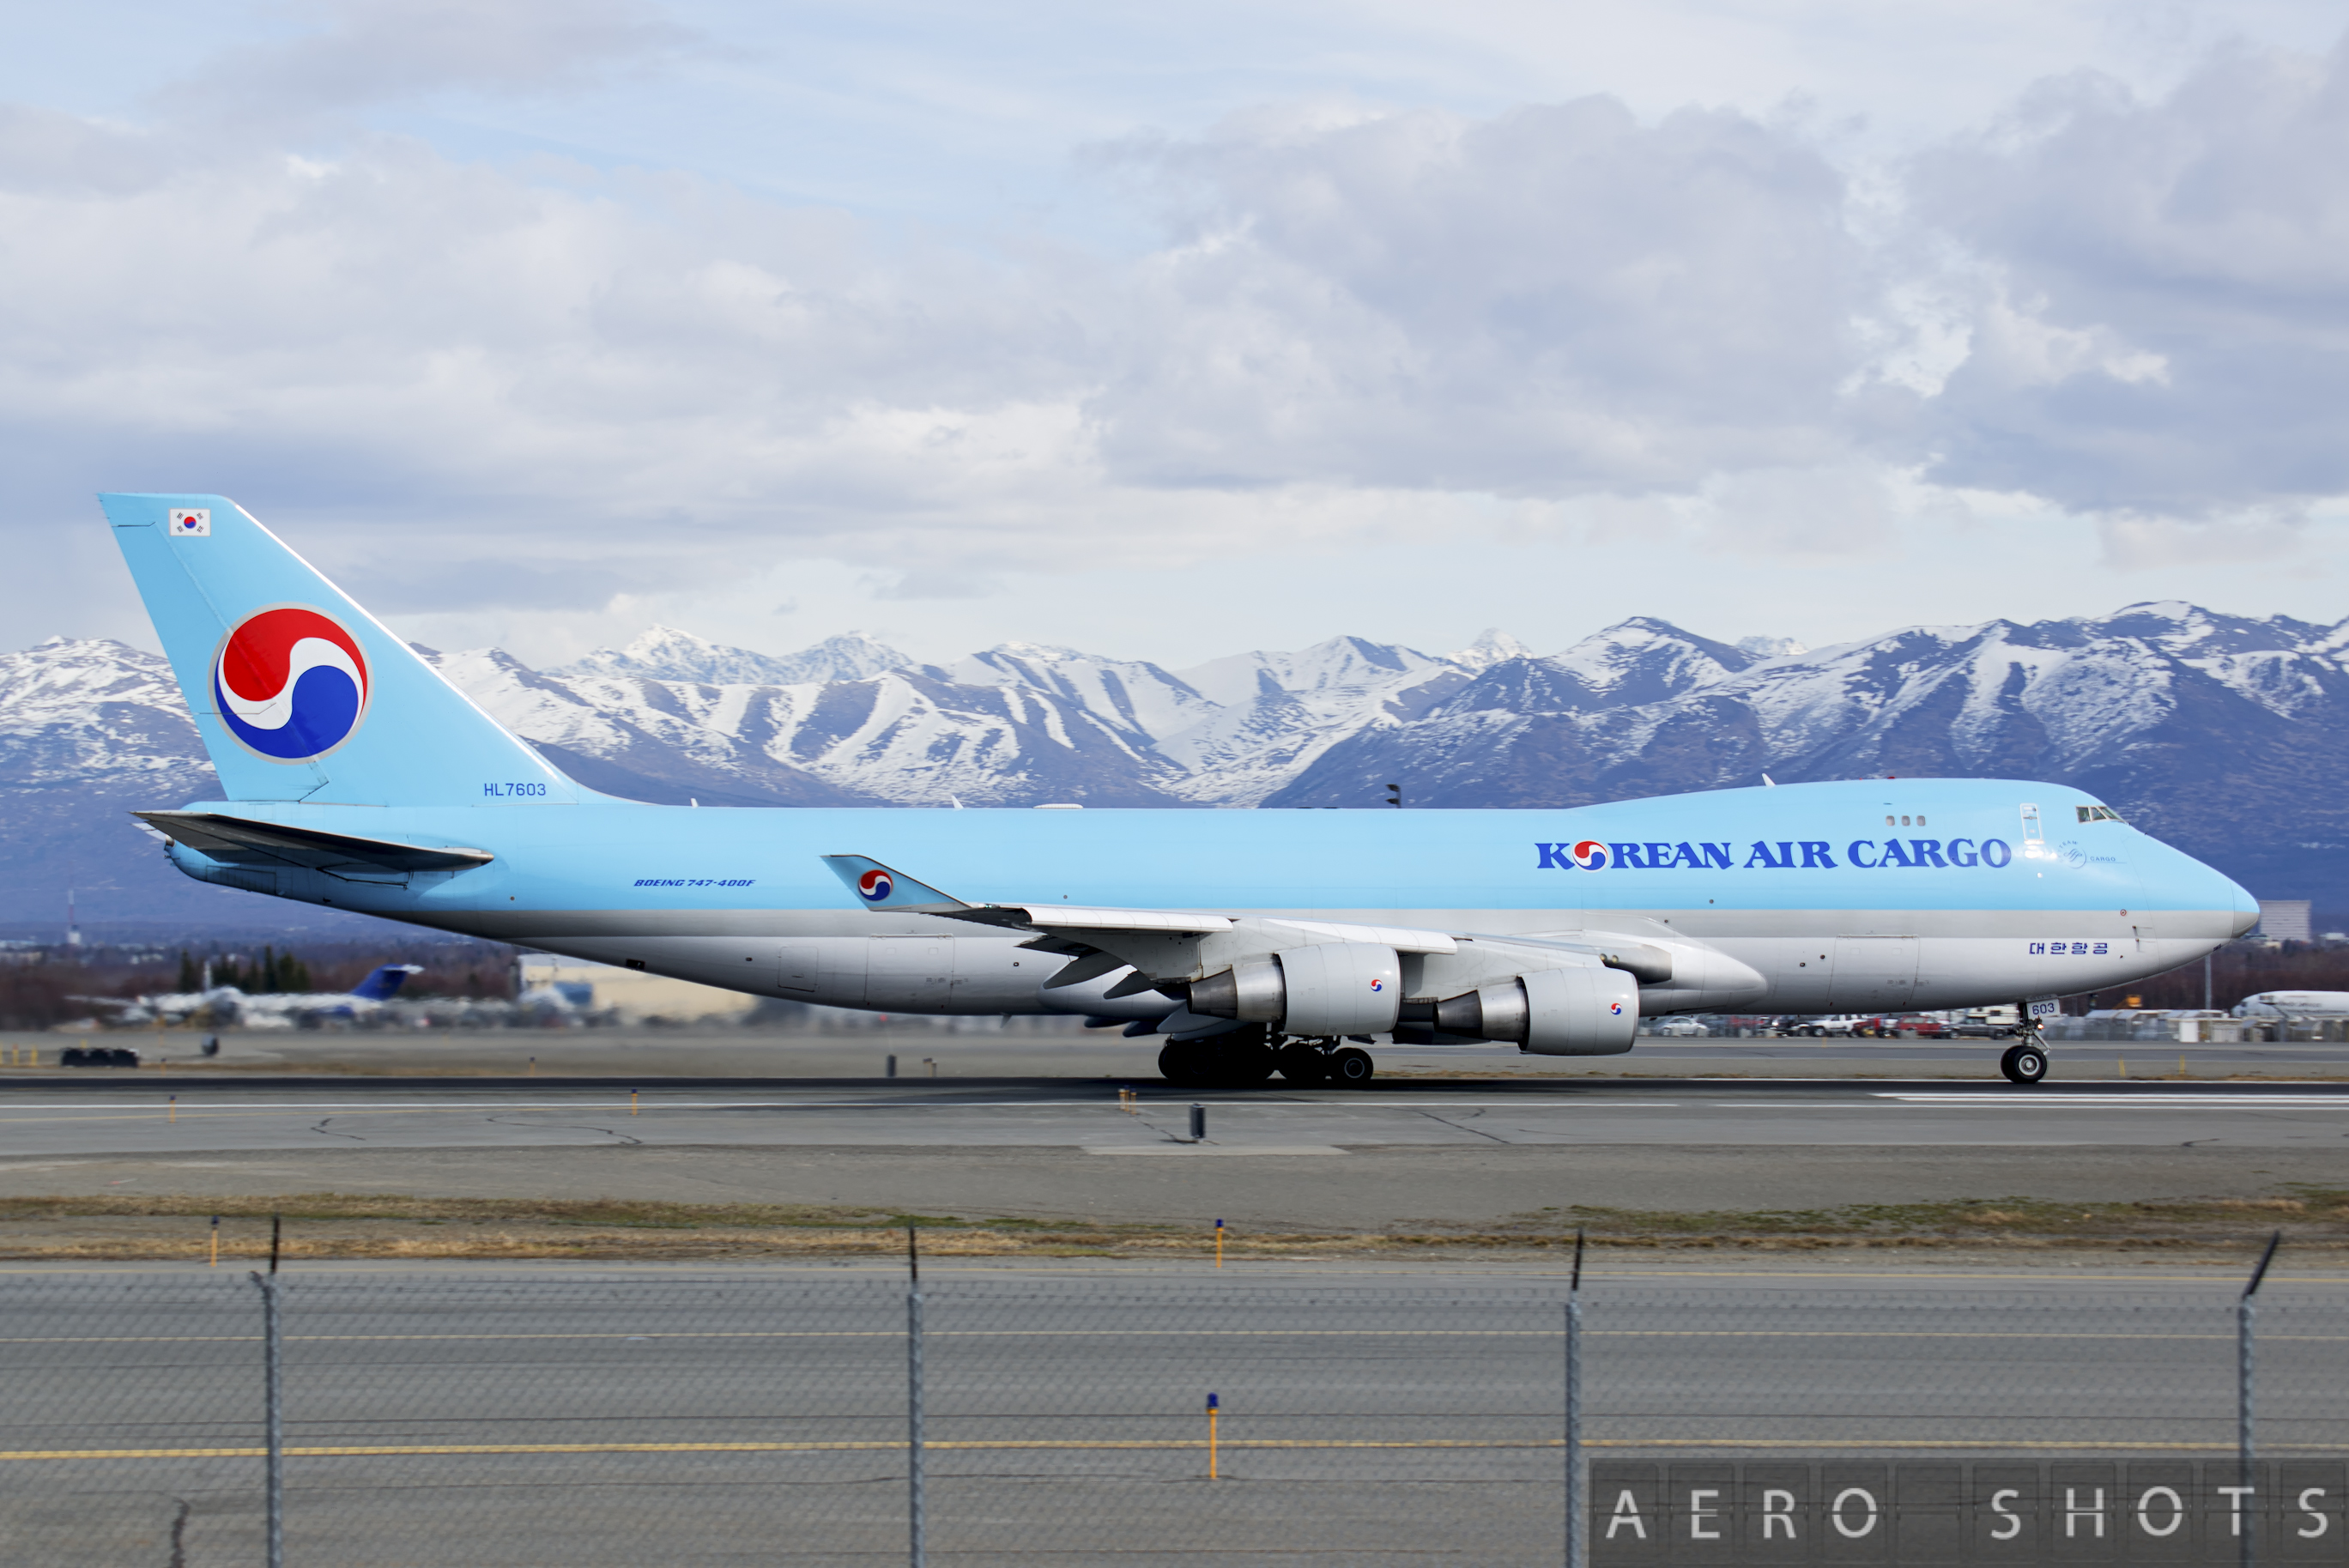 HL7603 in Anchorage (ANC)